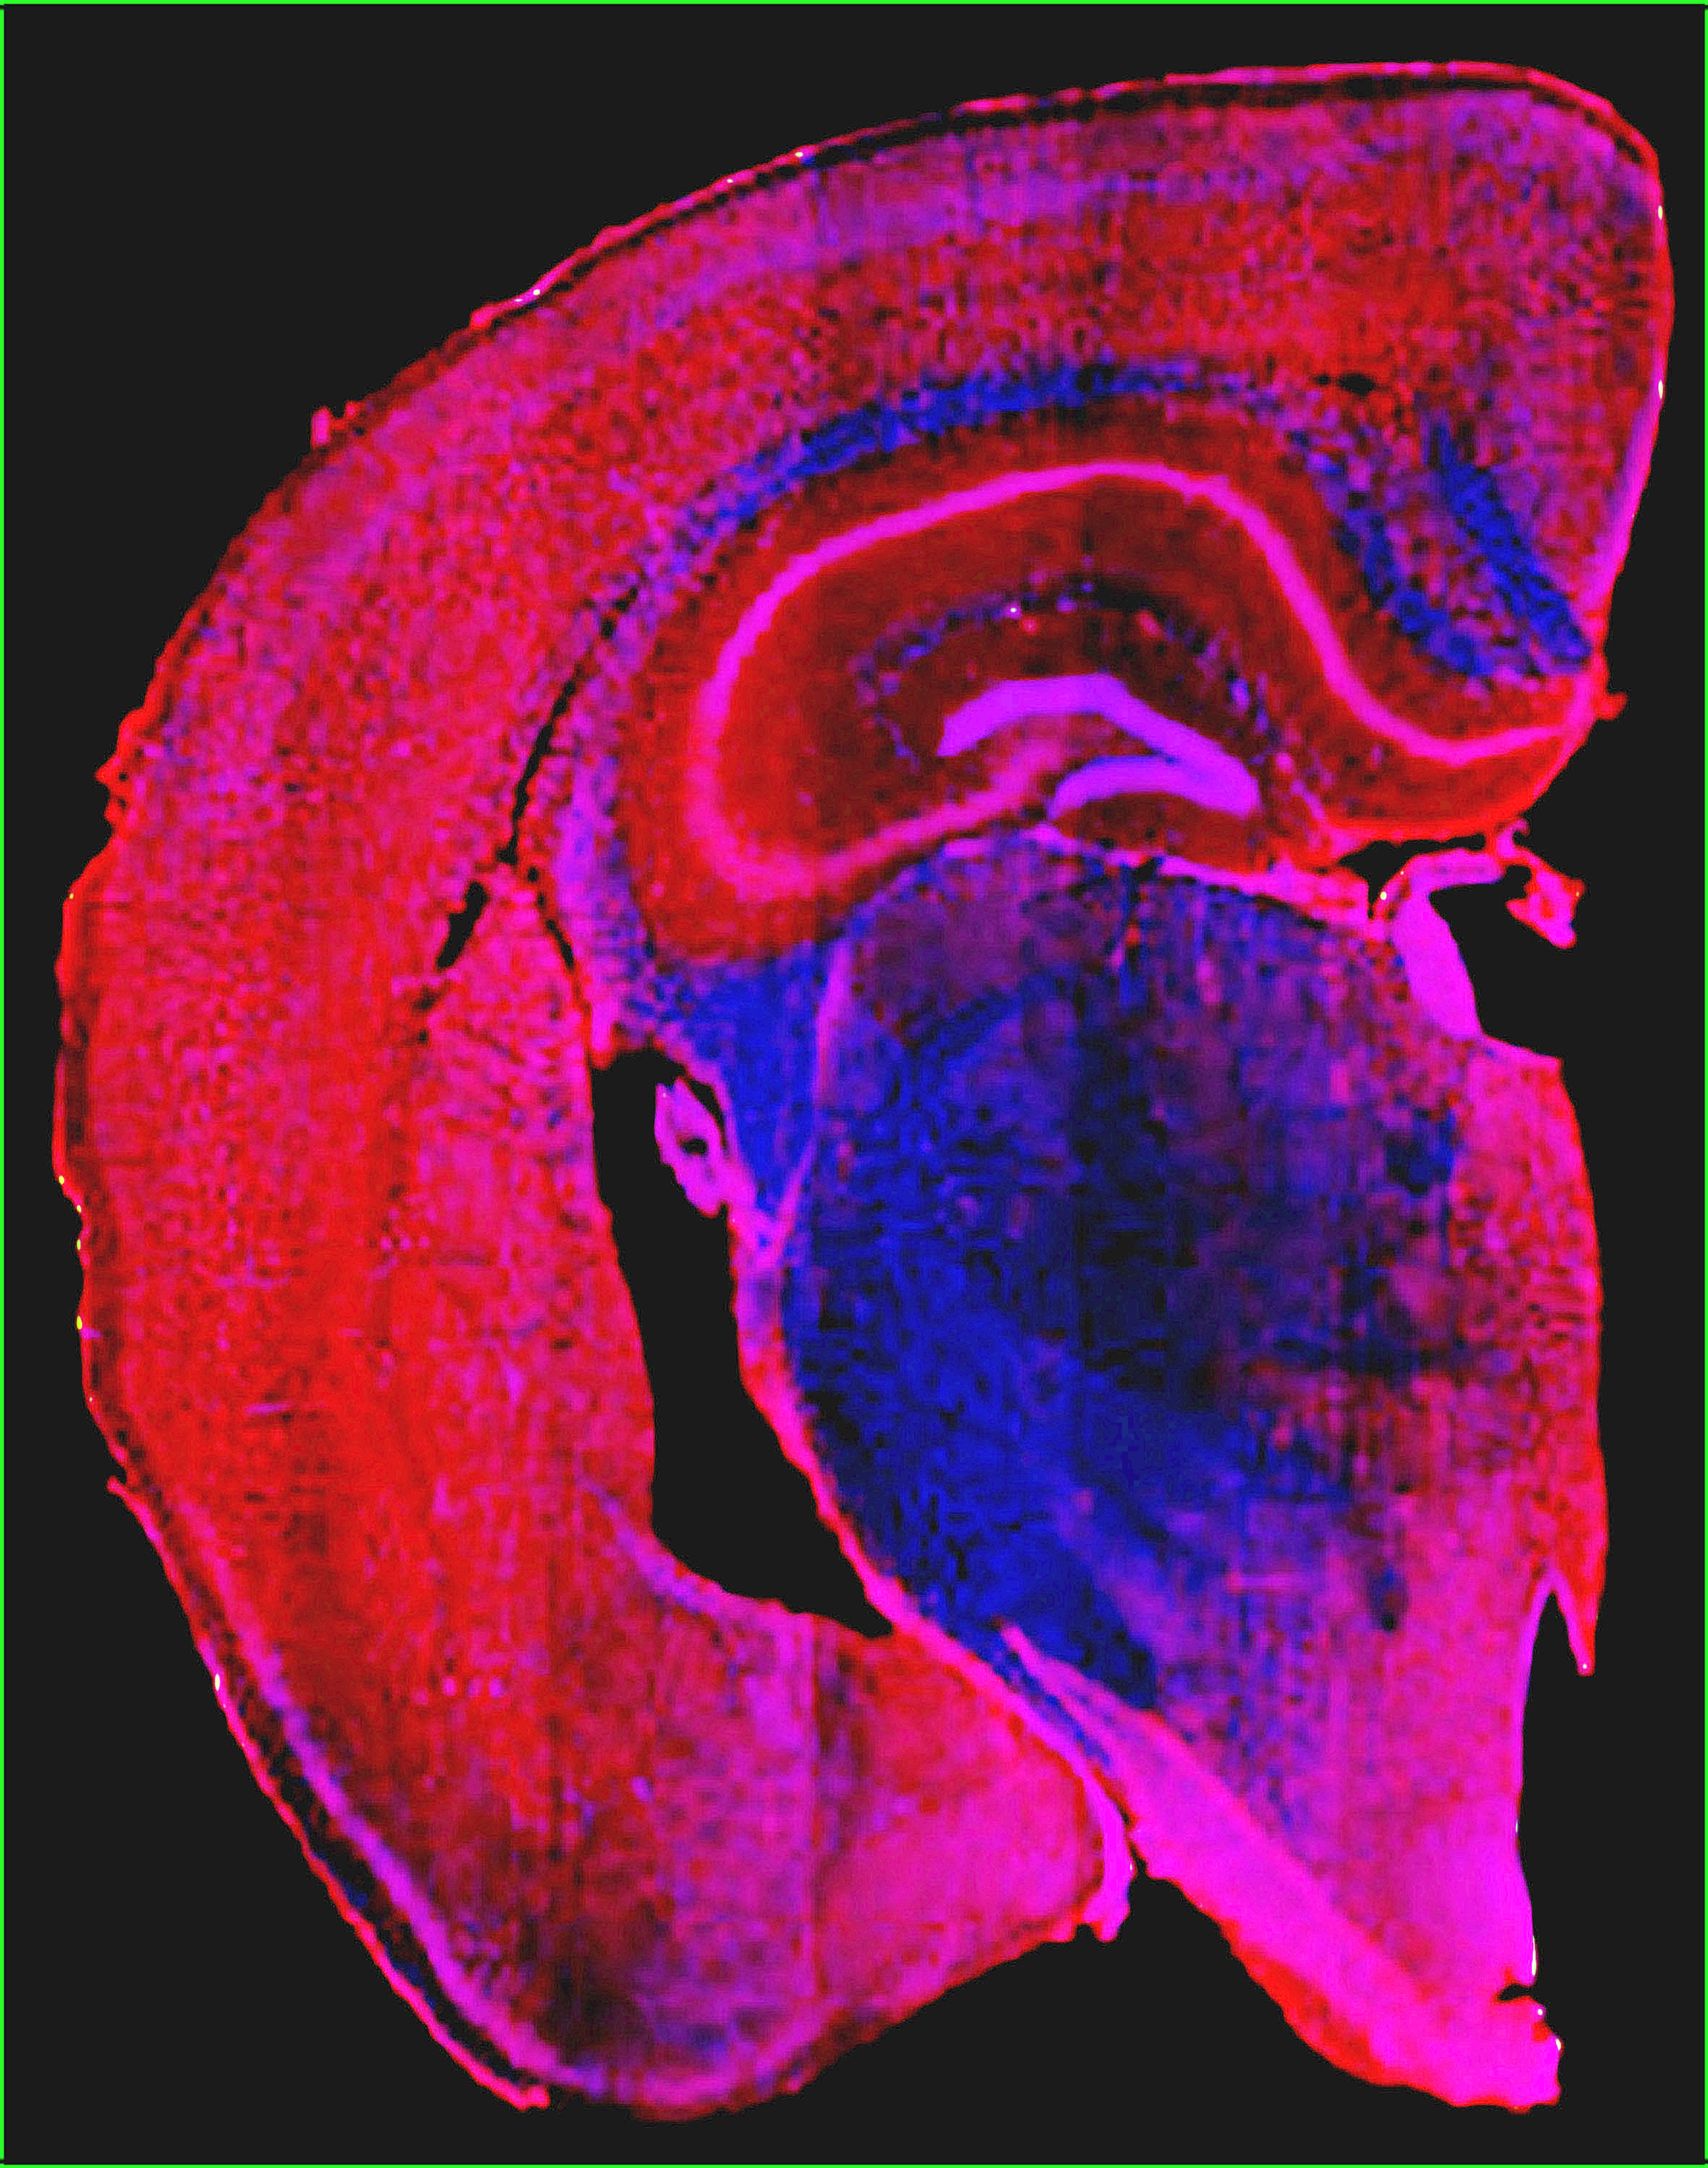 Image of a mouse brain scan